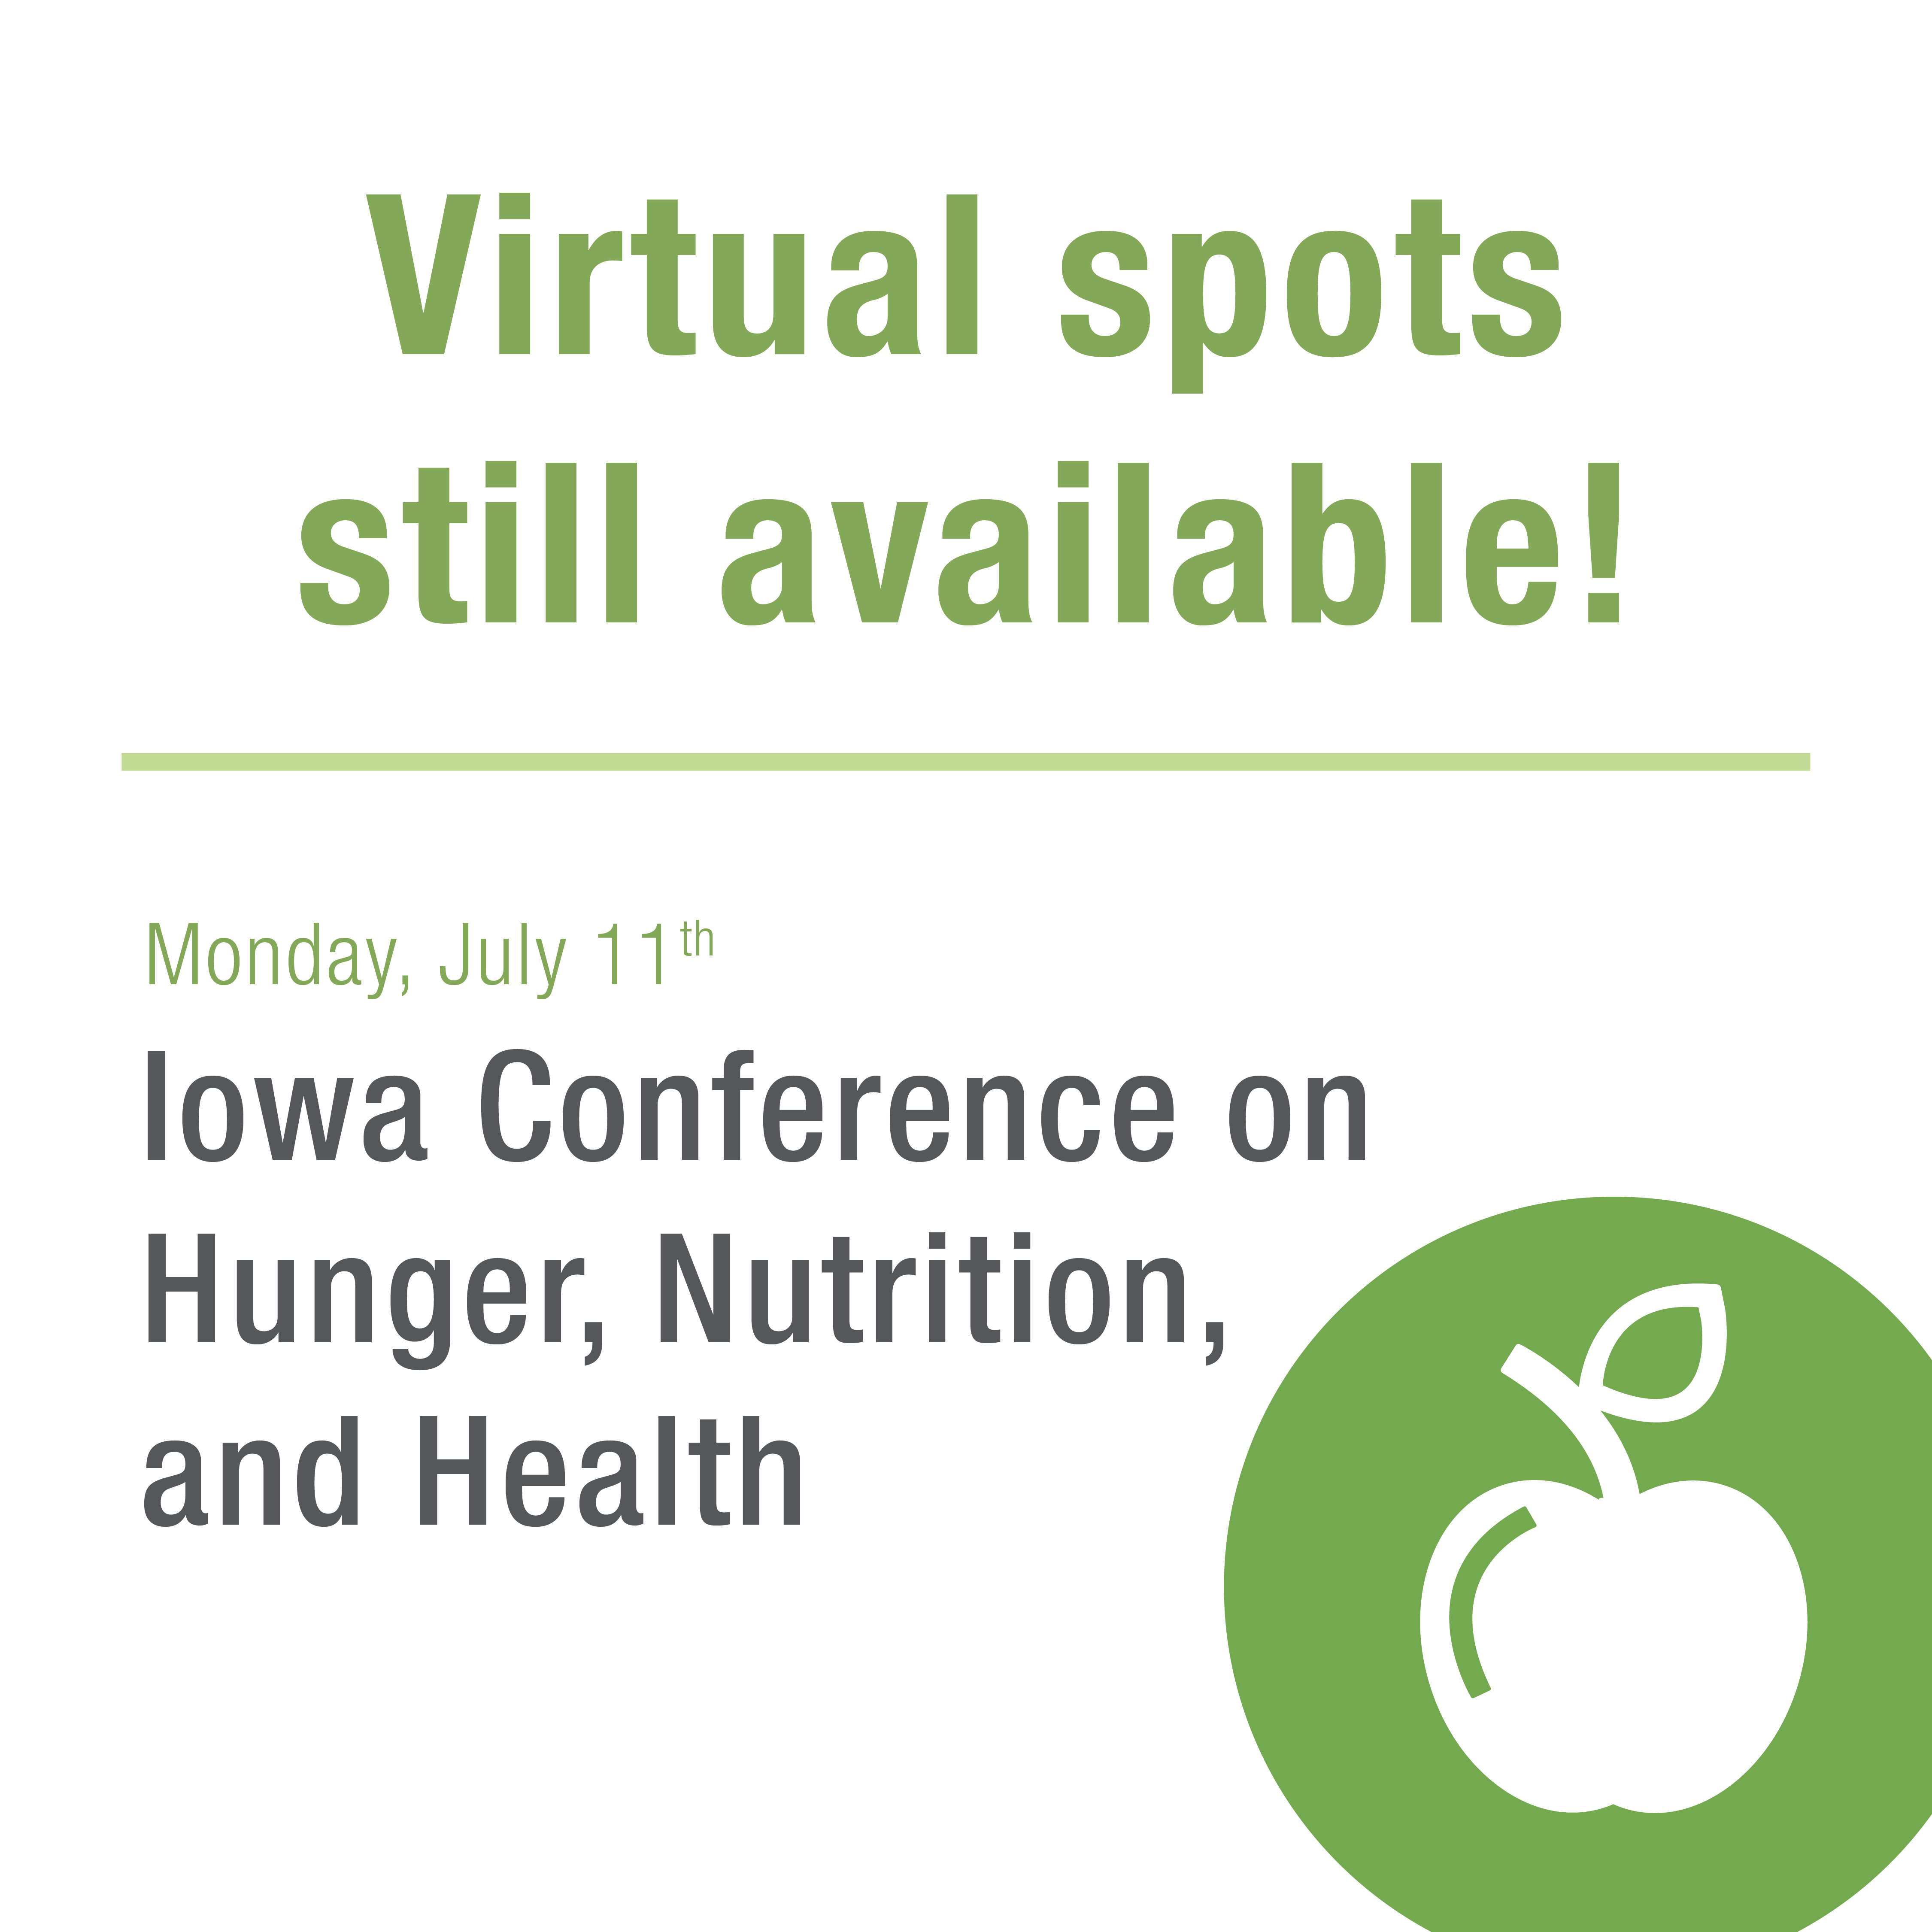 Woman standing at a podium speaking. Text underneath her reads "Monday July 11th. Iowa Conference on Hunger, Nutrition, and Health".